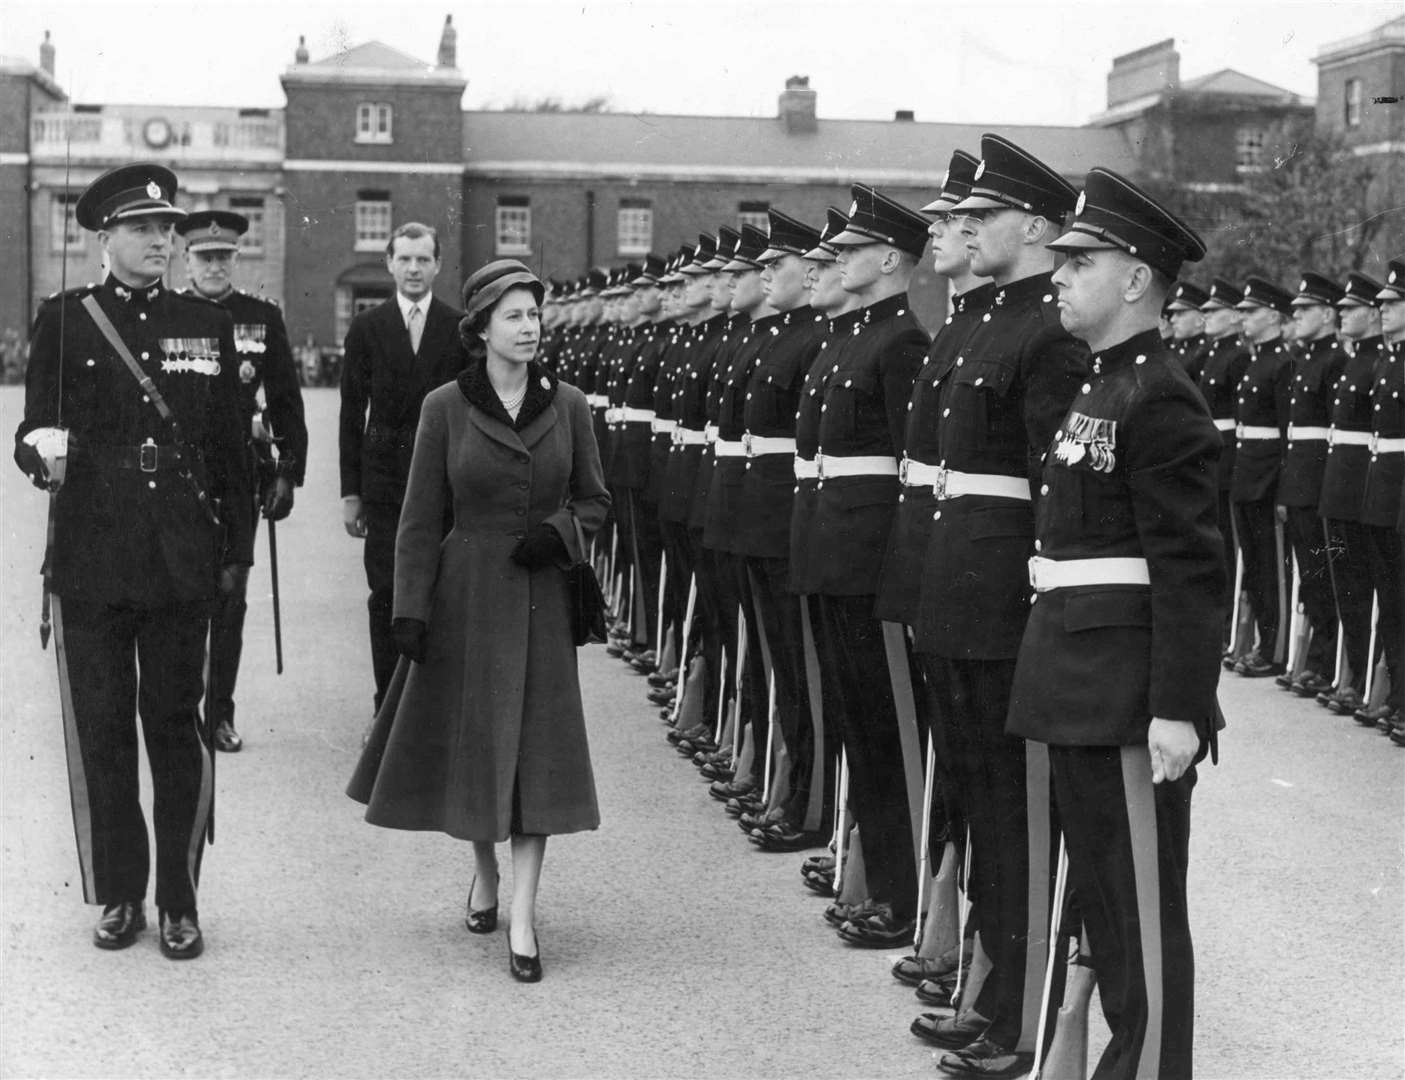 The Medway Towns gave a warm welcome to Queen Elizabeth II in October 1956 when she came to celebrate the centenary of the current corps of the Royal Engineers, of which she is Colonel-in-Chief